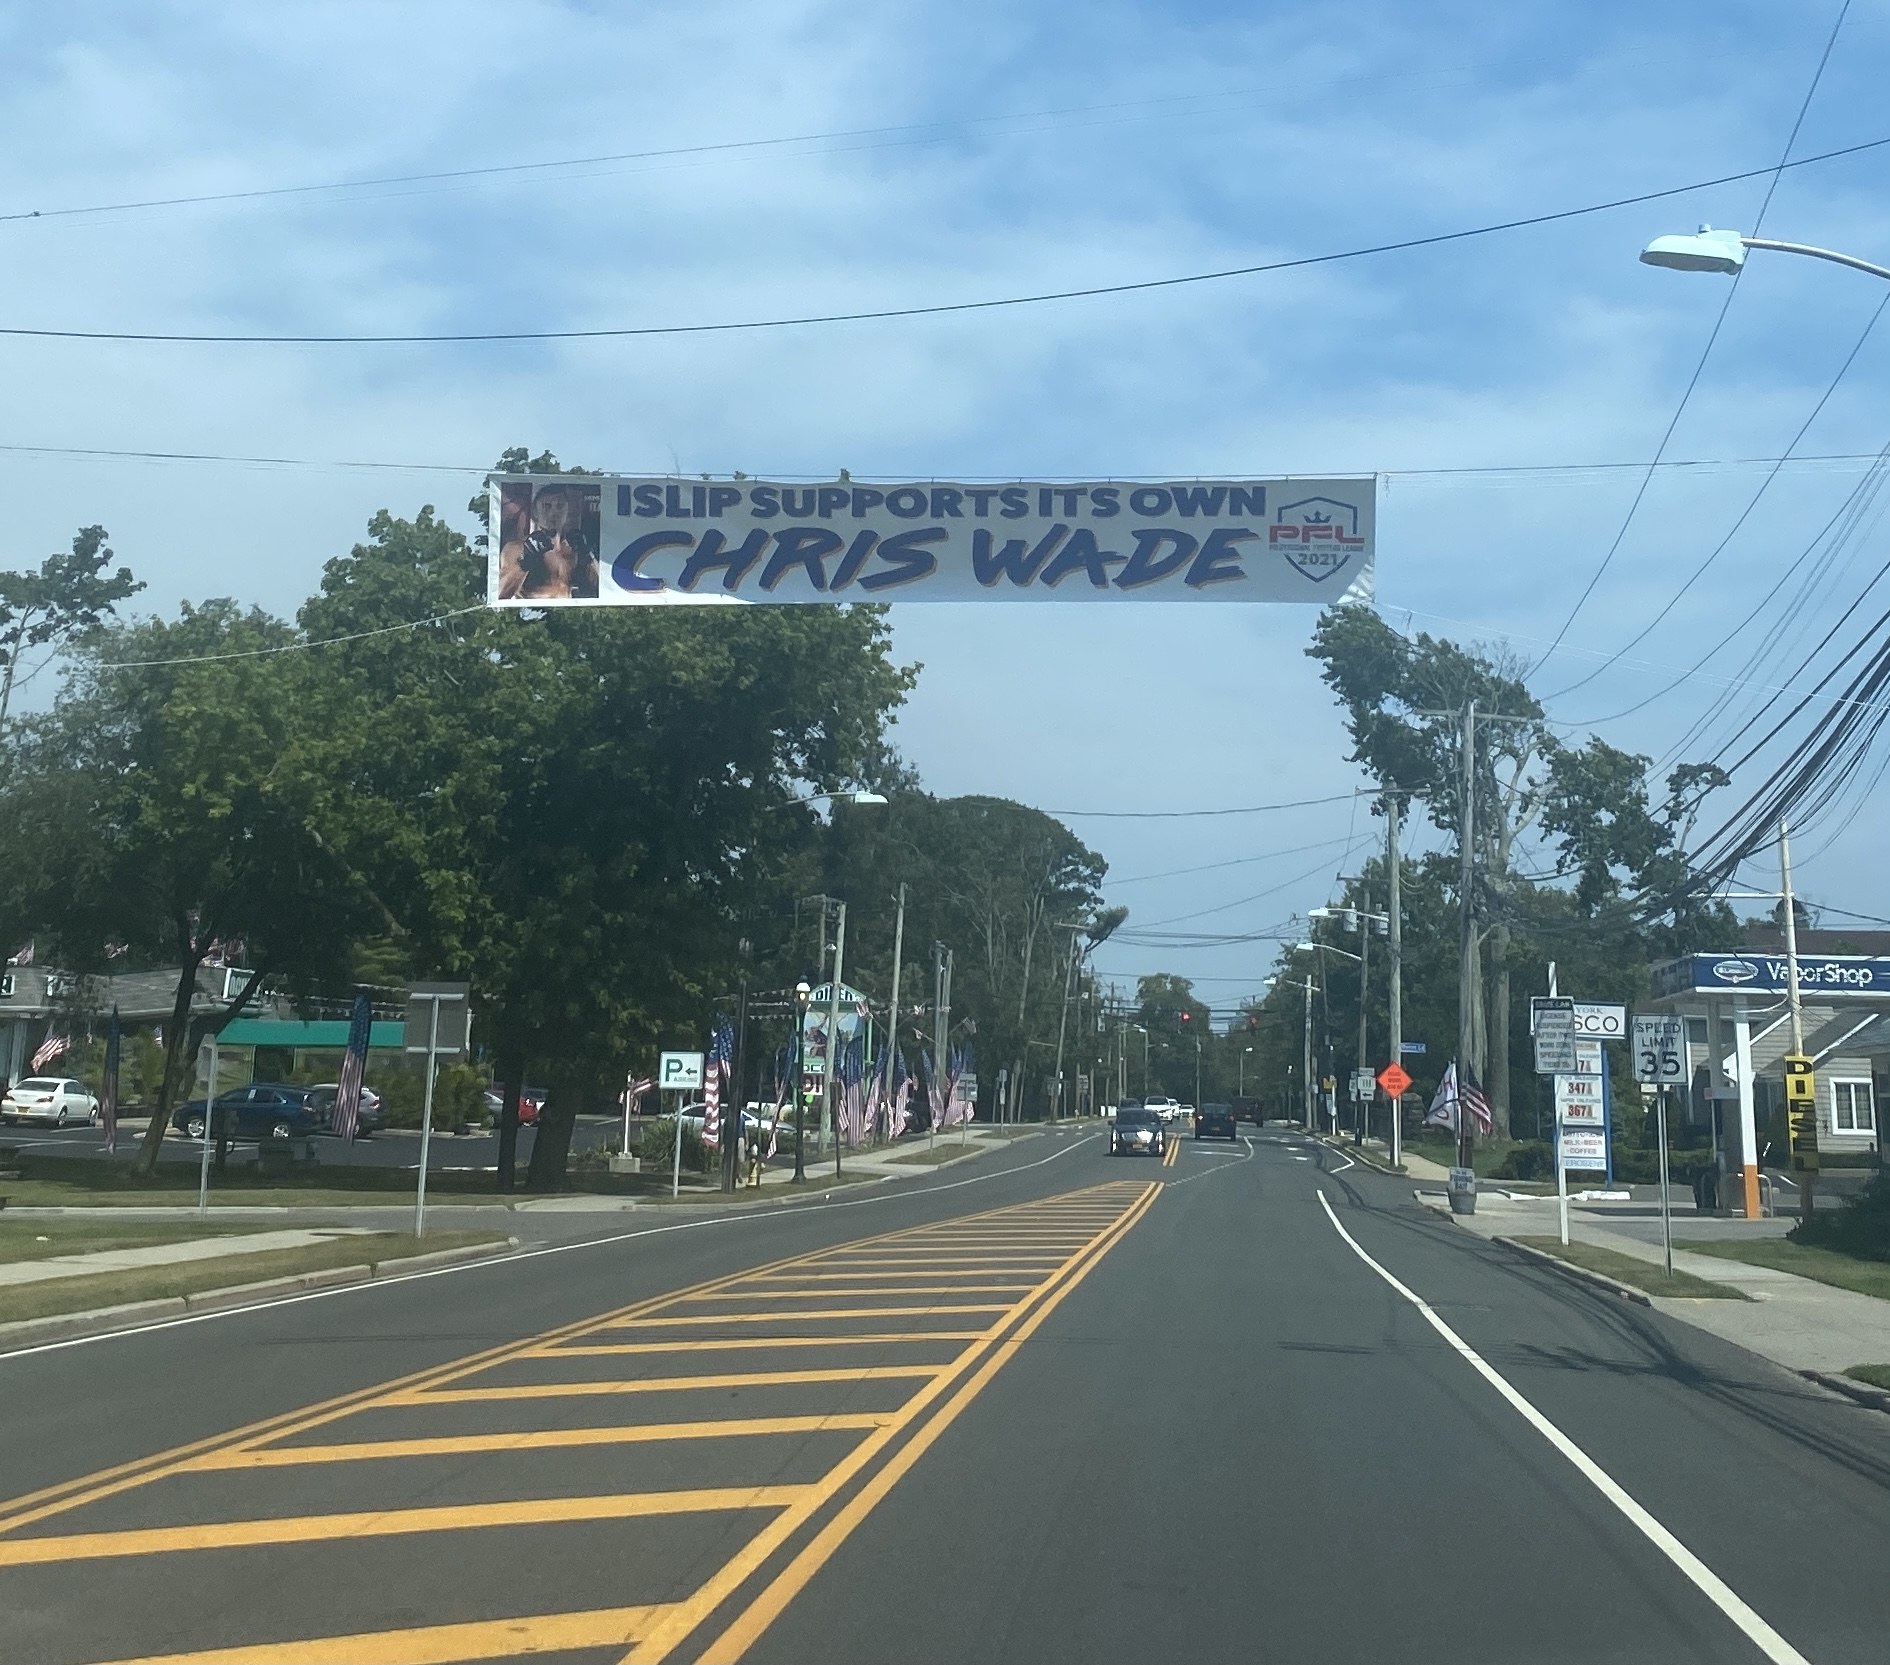 Banner in islip supporting chris wade.